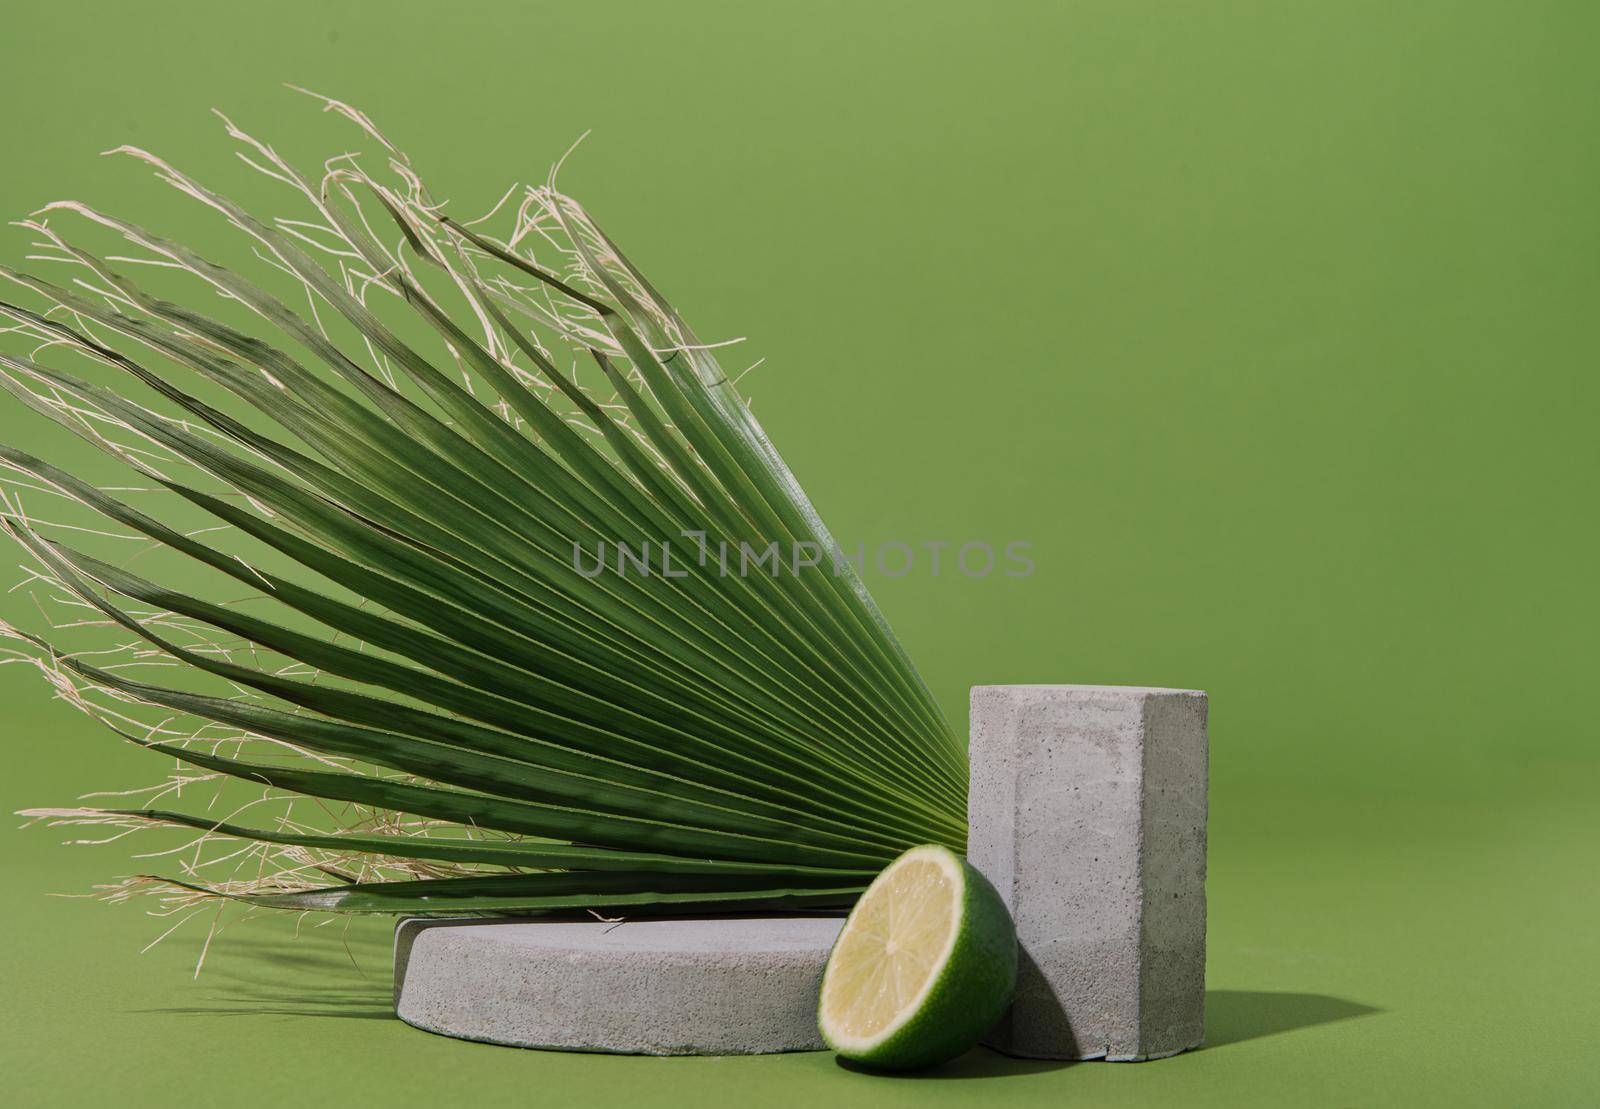 mockup with palm leaf, lime half and concrete shapes by maramorosz